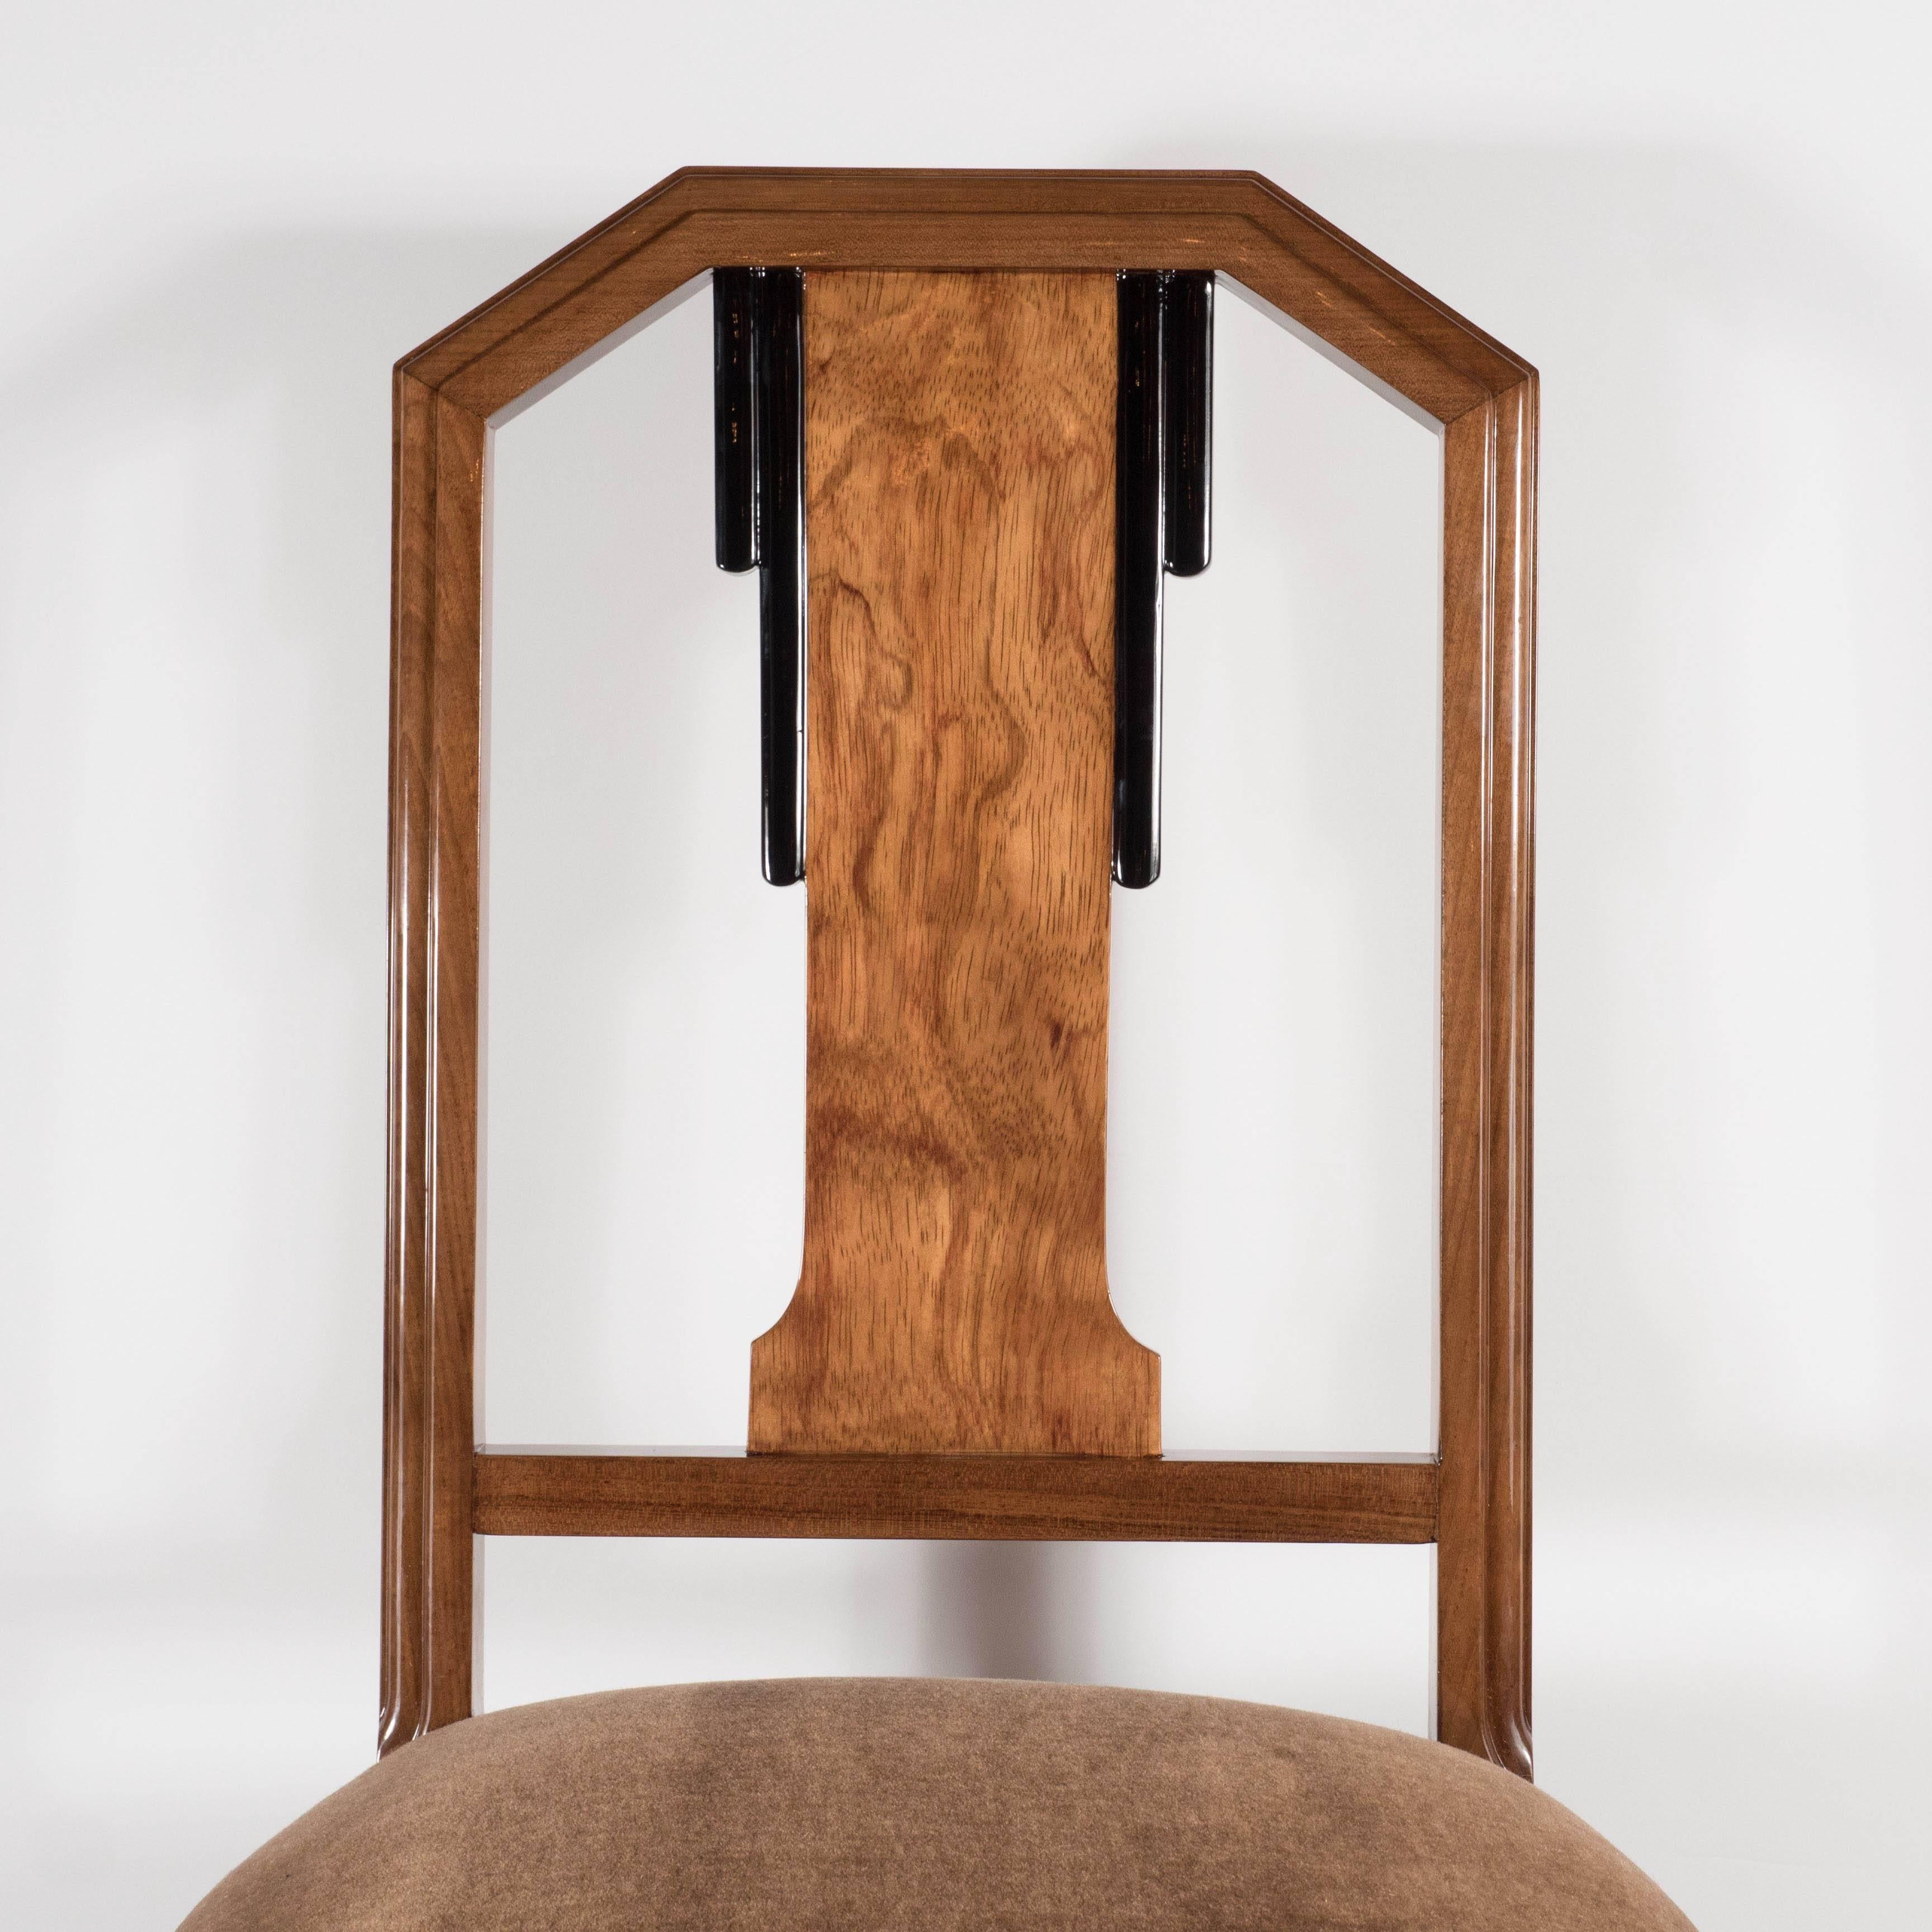 This gorgeous Art Deco skyscraper style two-tone desk or occasional chair was realized in the United States, circa 1935. It features a rectilinear skyscraper style back with a central panel in burled walnut flanked by a stepped black laquer design